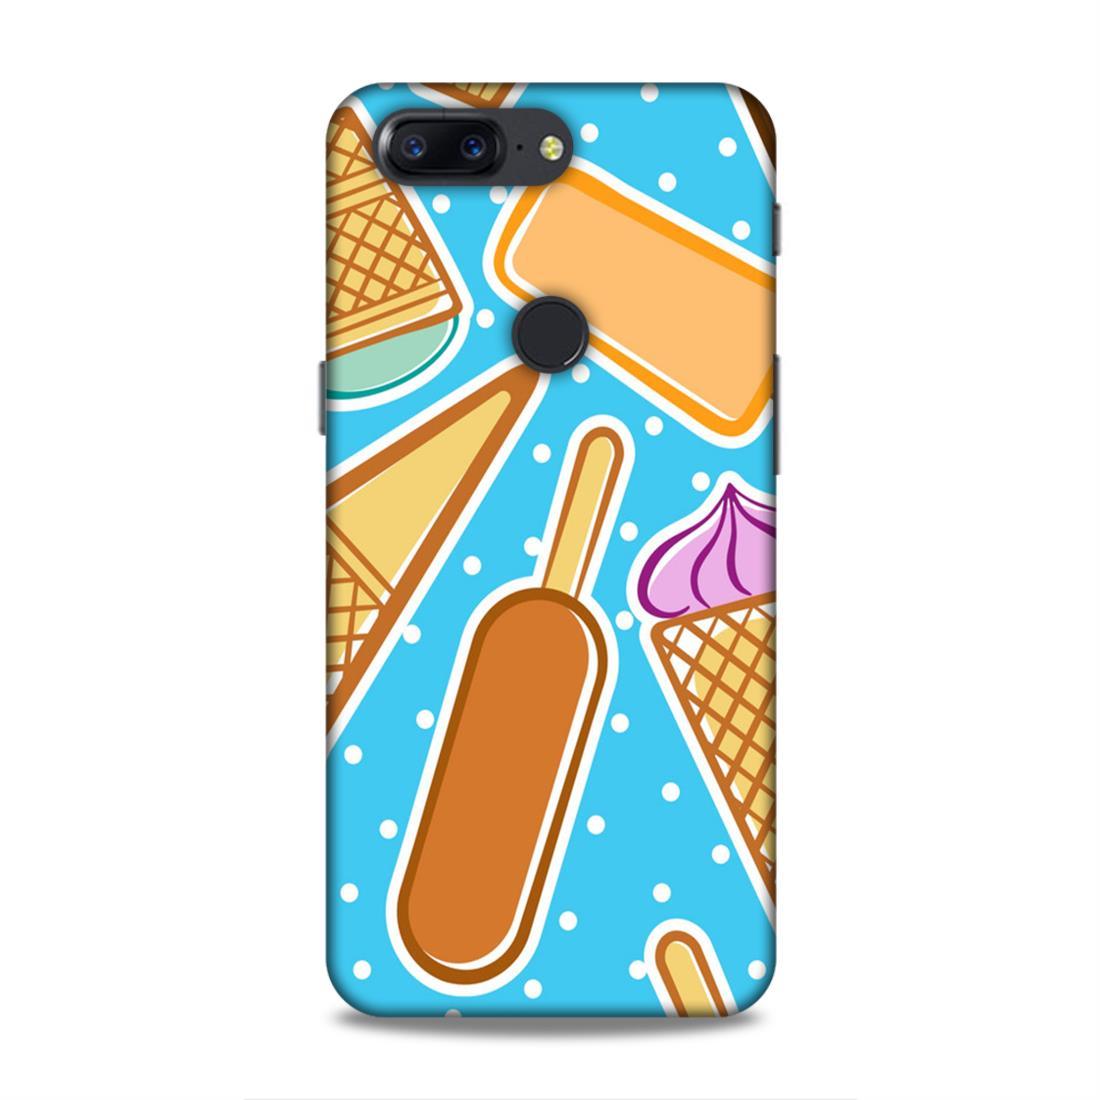 Candy Corn Blue OnePlus 5T Mobile Cover Case